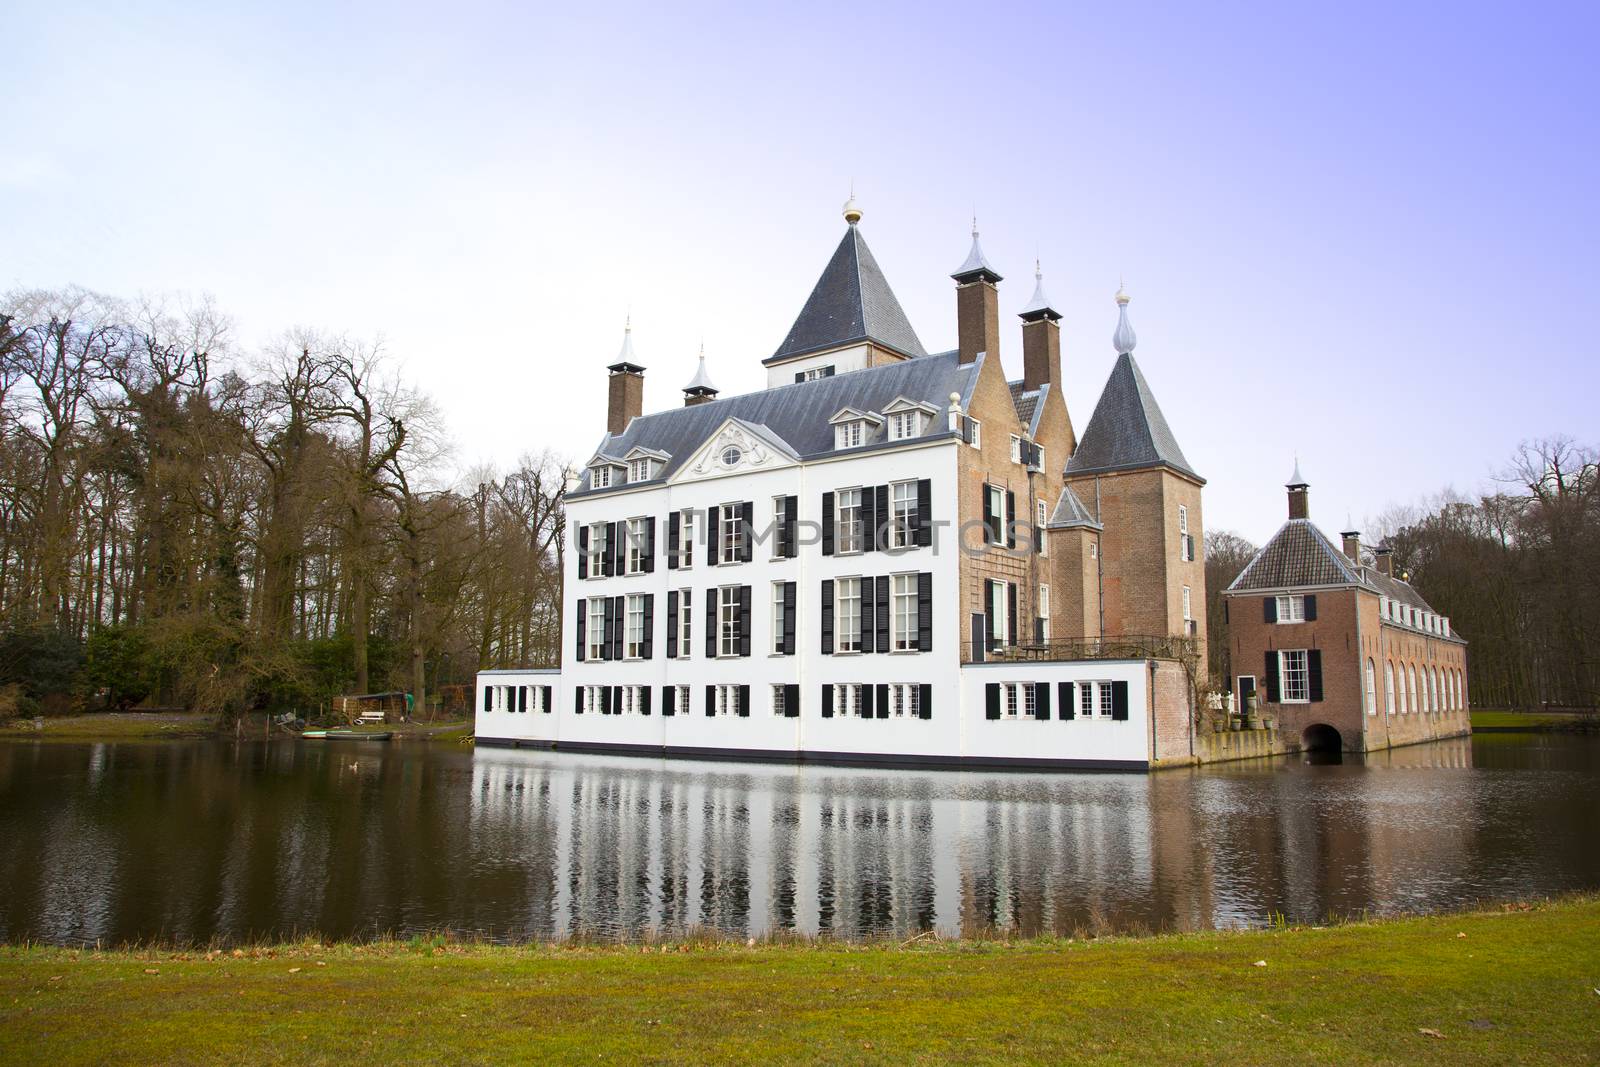 View at castle of Renswoude, The Netherlands